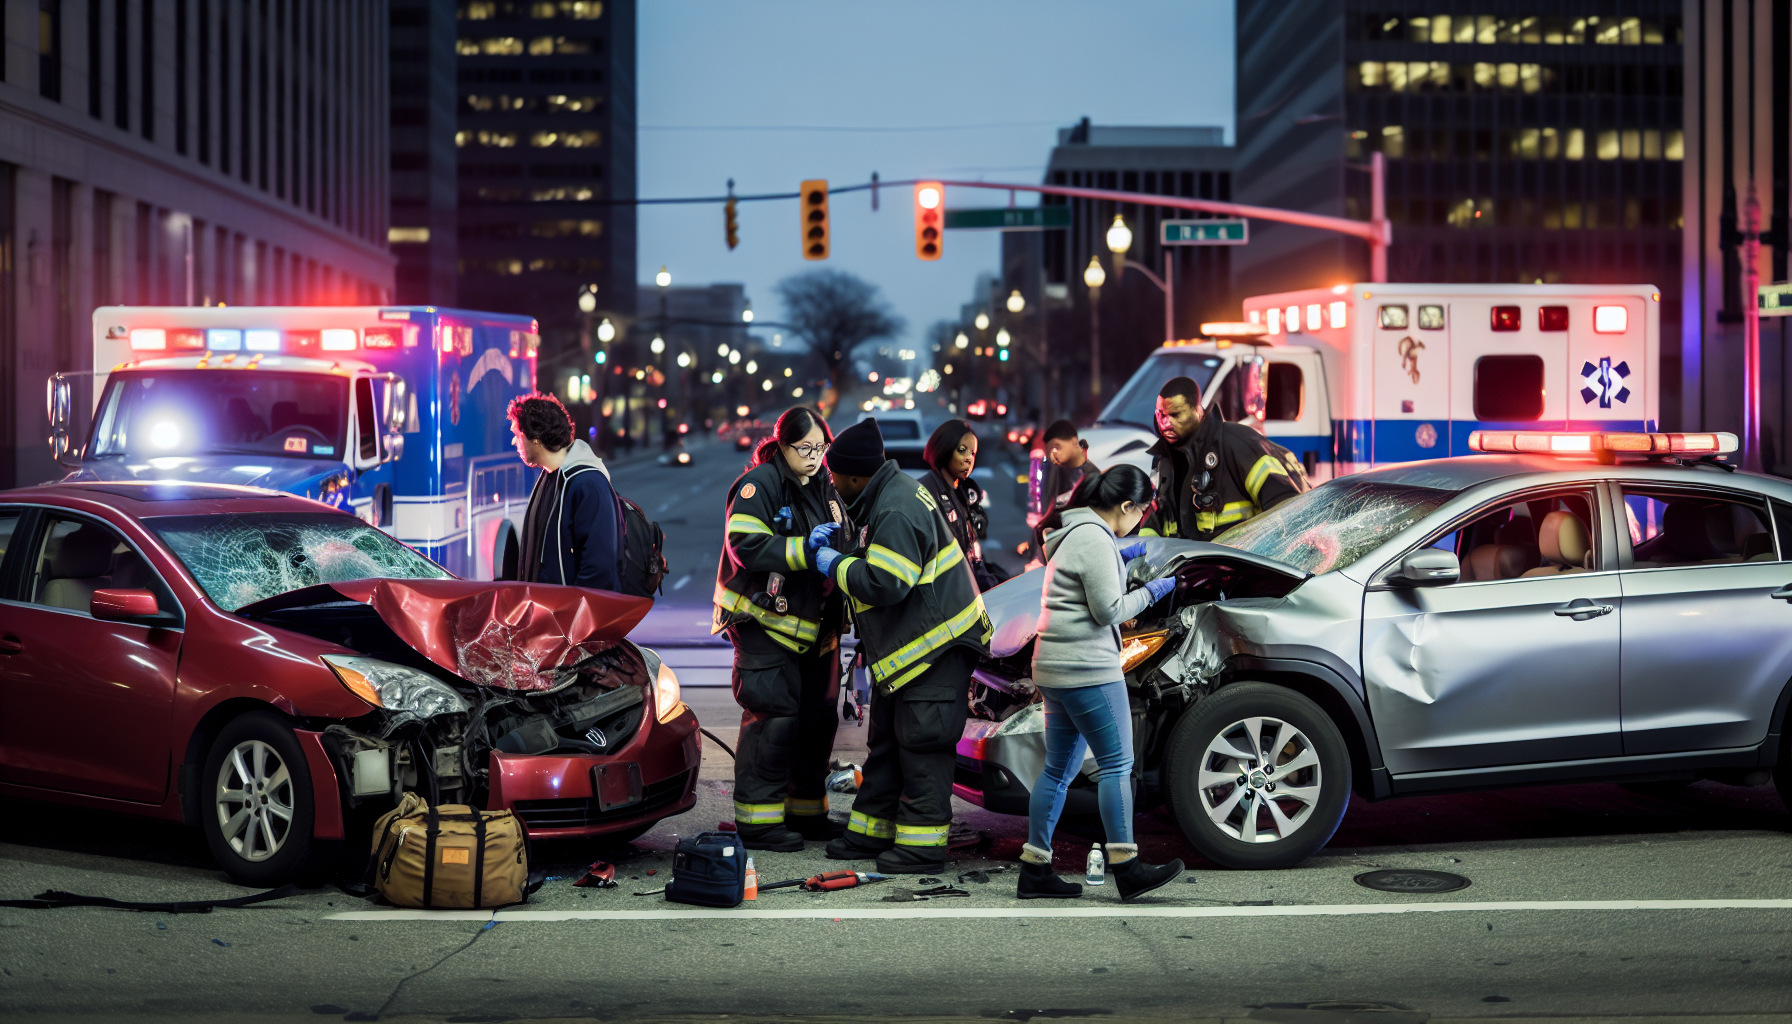 Car accident scene with damaged vehicles and emergency responders